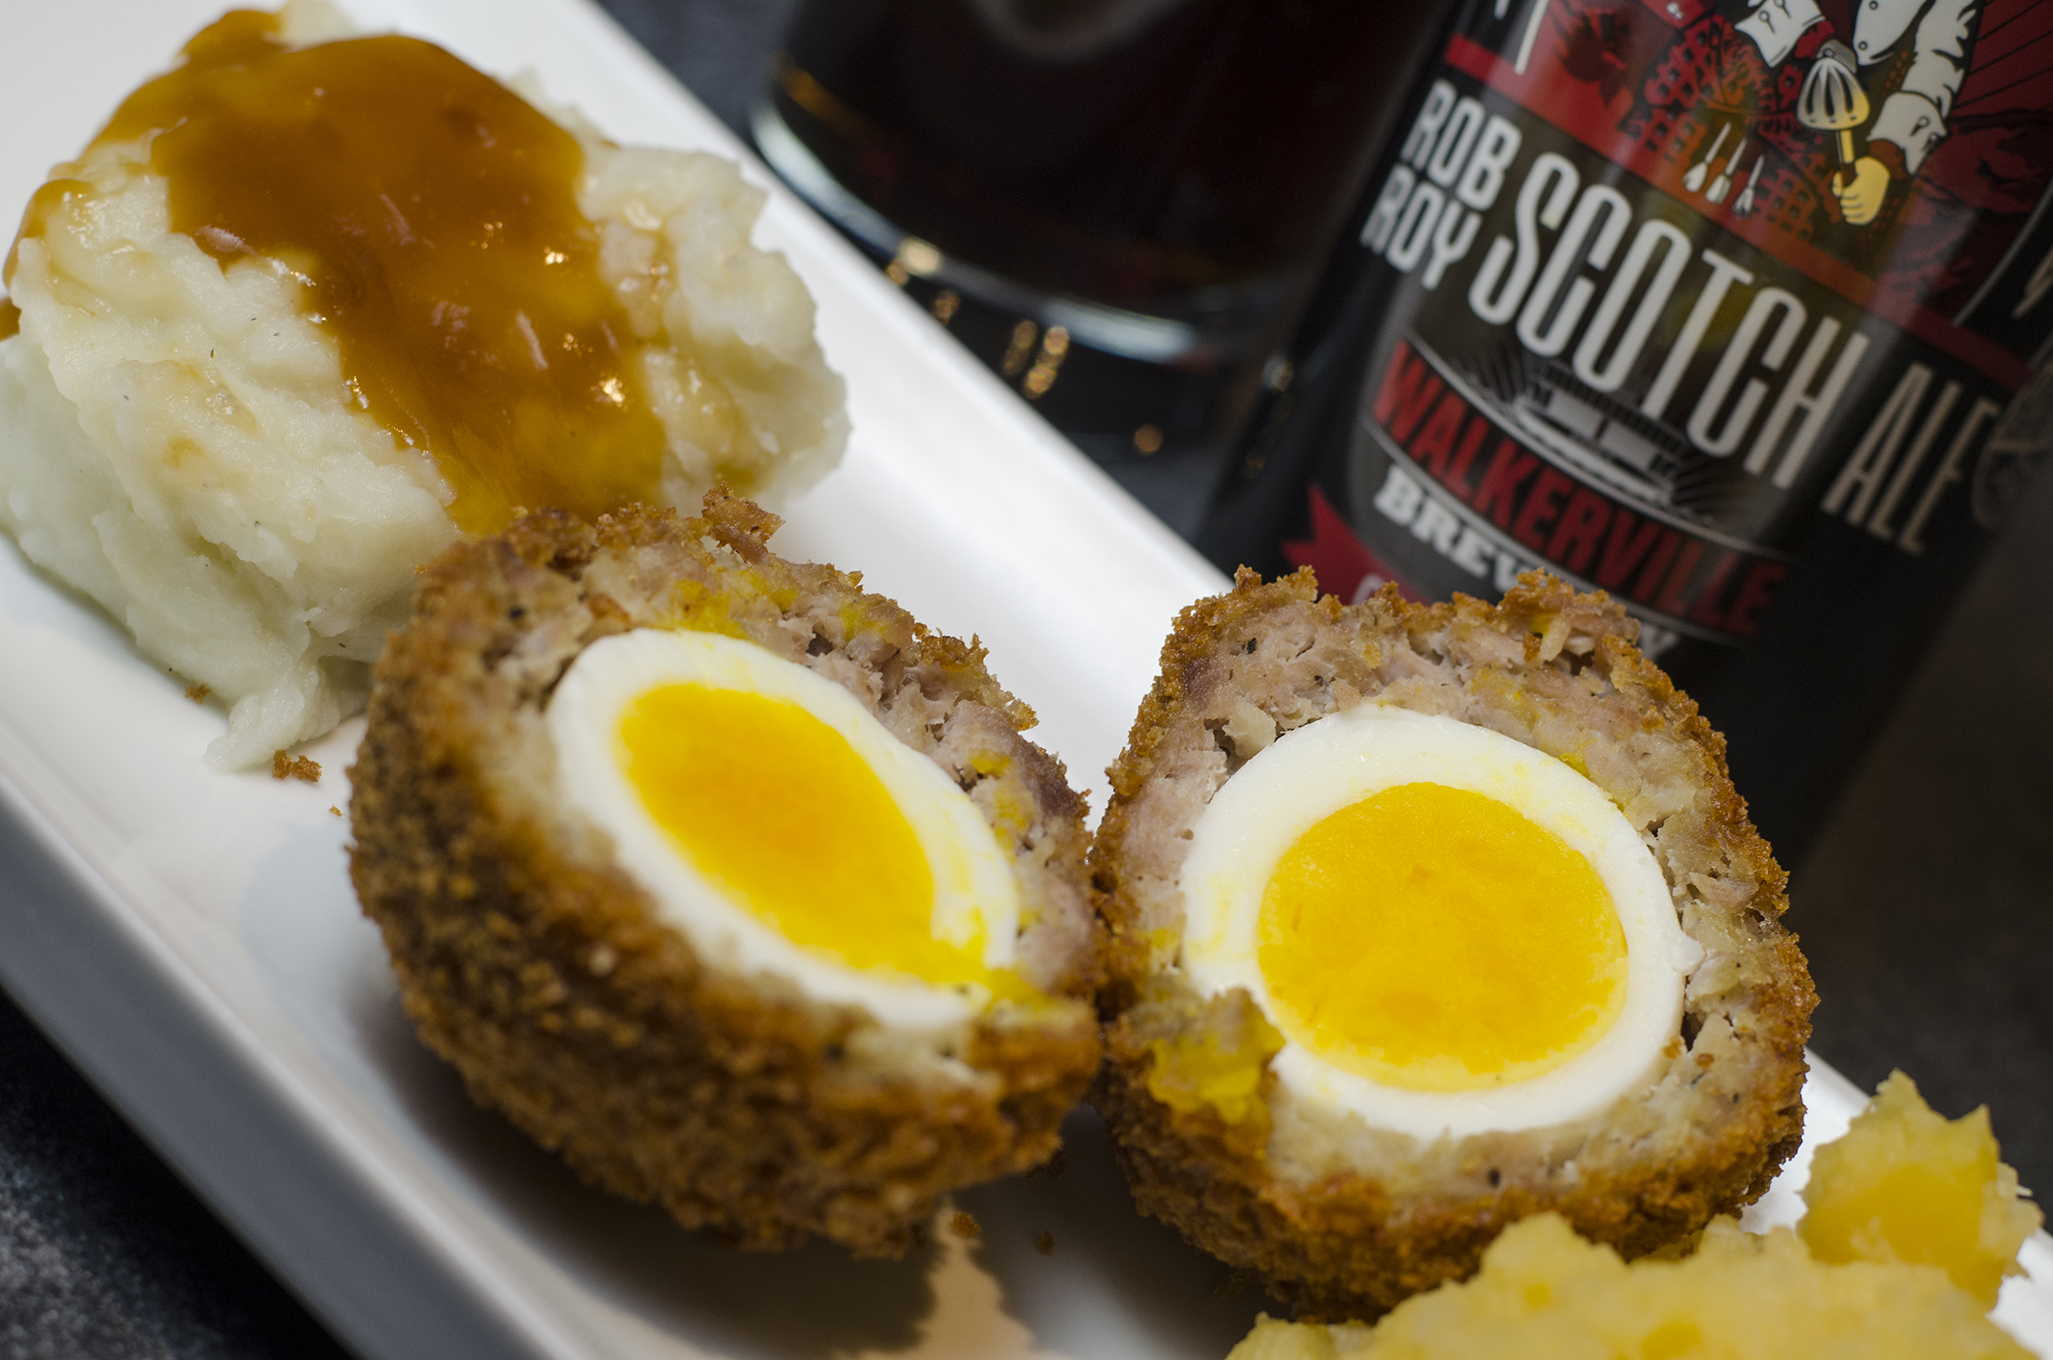 Scotch eggs are being offered up for Robbie Burns Day at Beacon Ale House in Amherstburg, Ontario.